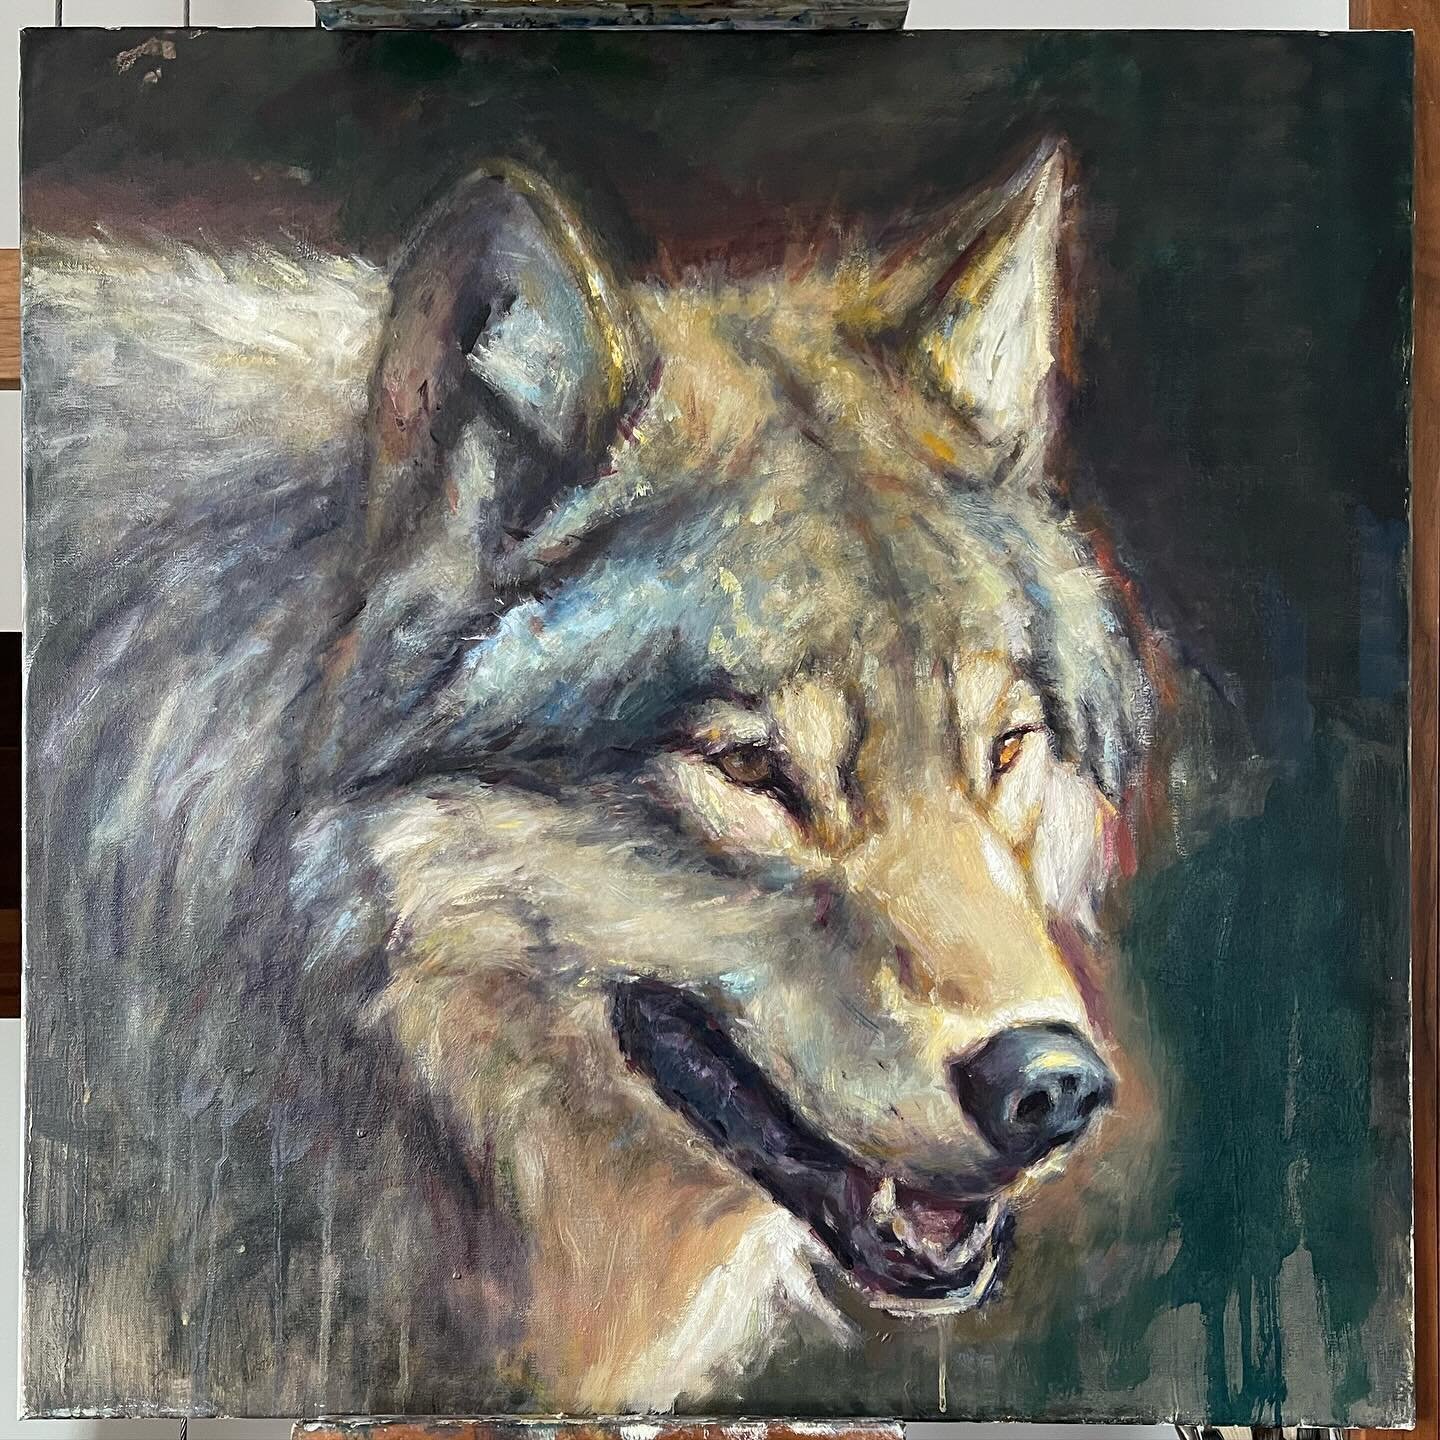 Honoring wolves with my paint, what better way to use my skill. I think this beautiful creature portrait is ready. 24x24 - oil on linen - available 
Have you noticed, you can&rsquo;t spell WOLVES without LOVE ❤️ ..
#wolfpainting #wolf #wolves #oilpai